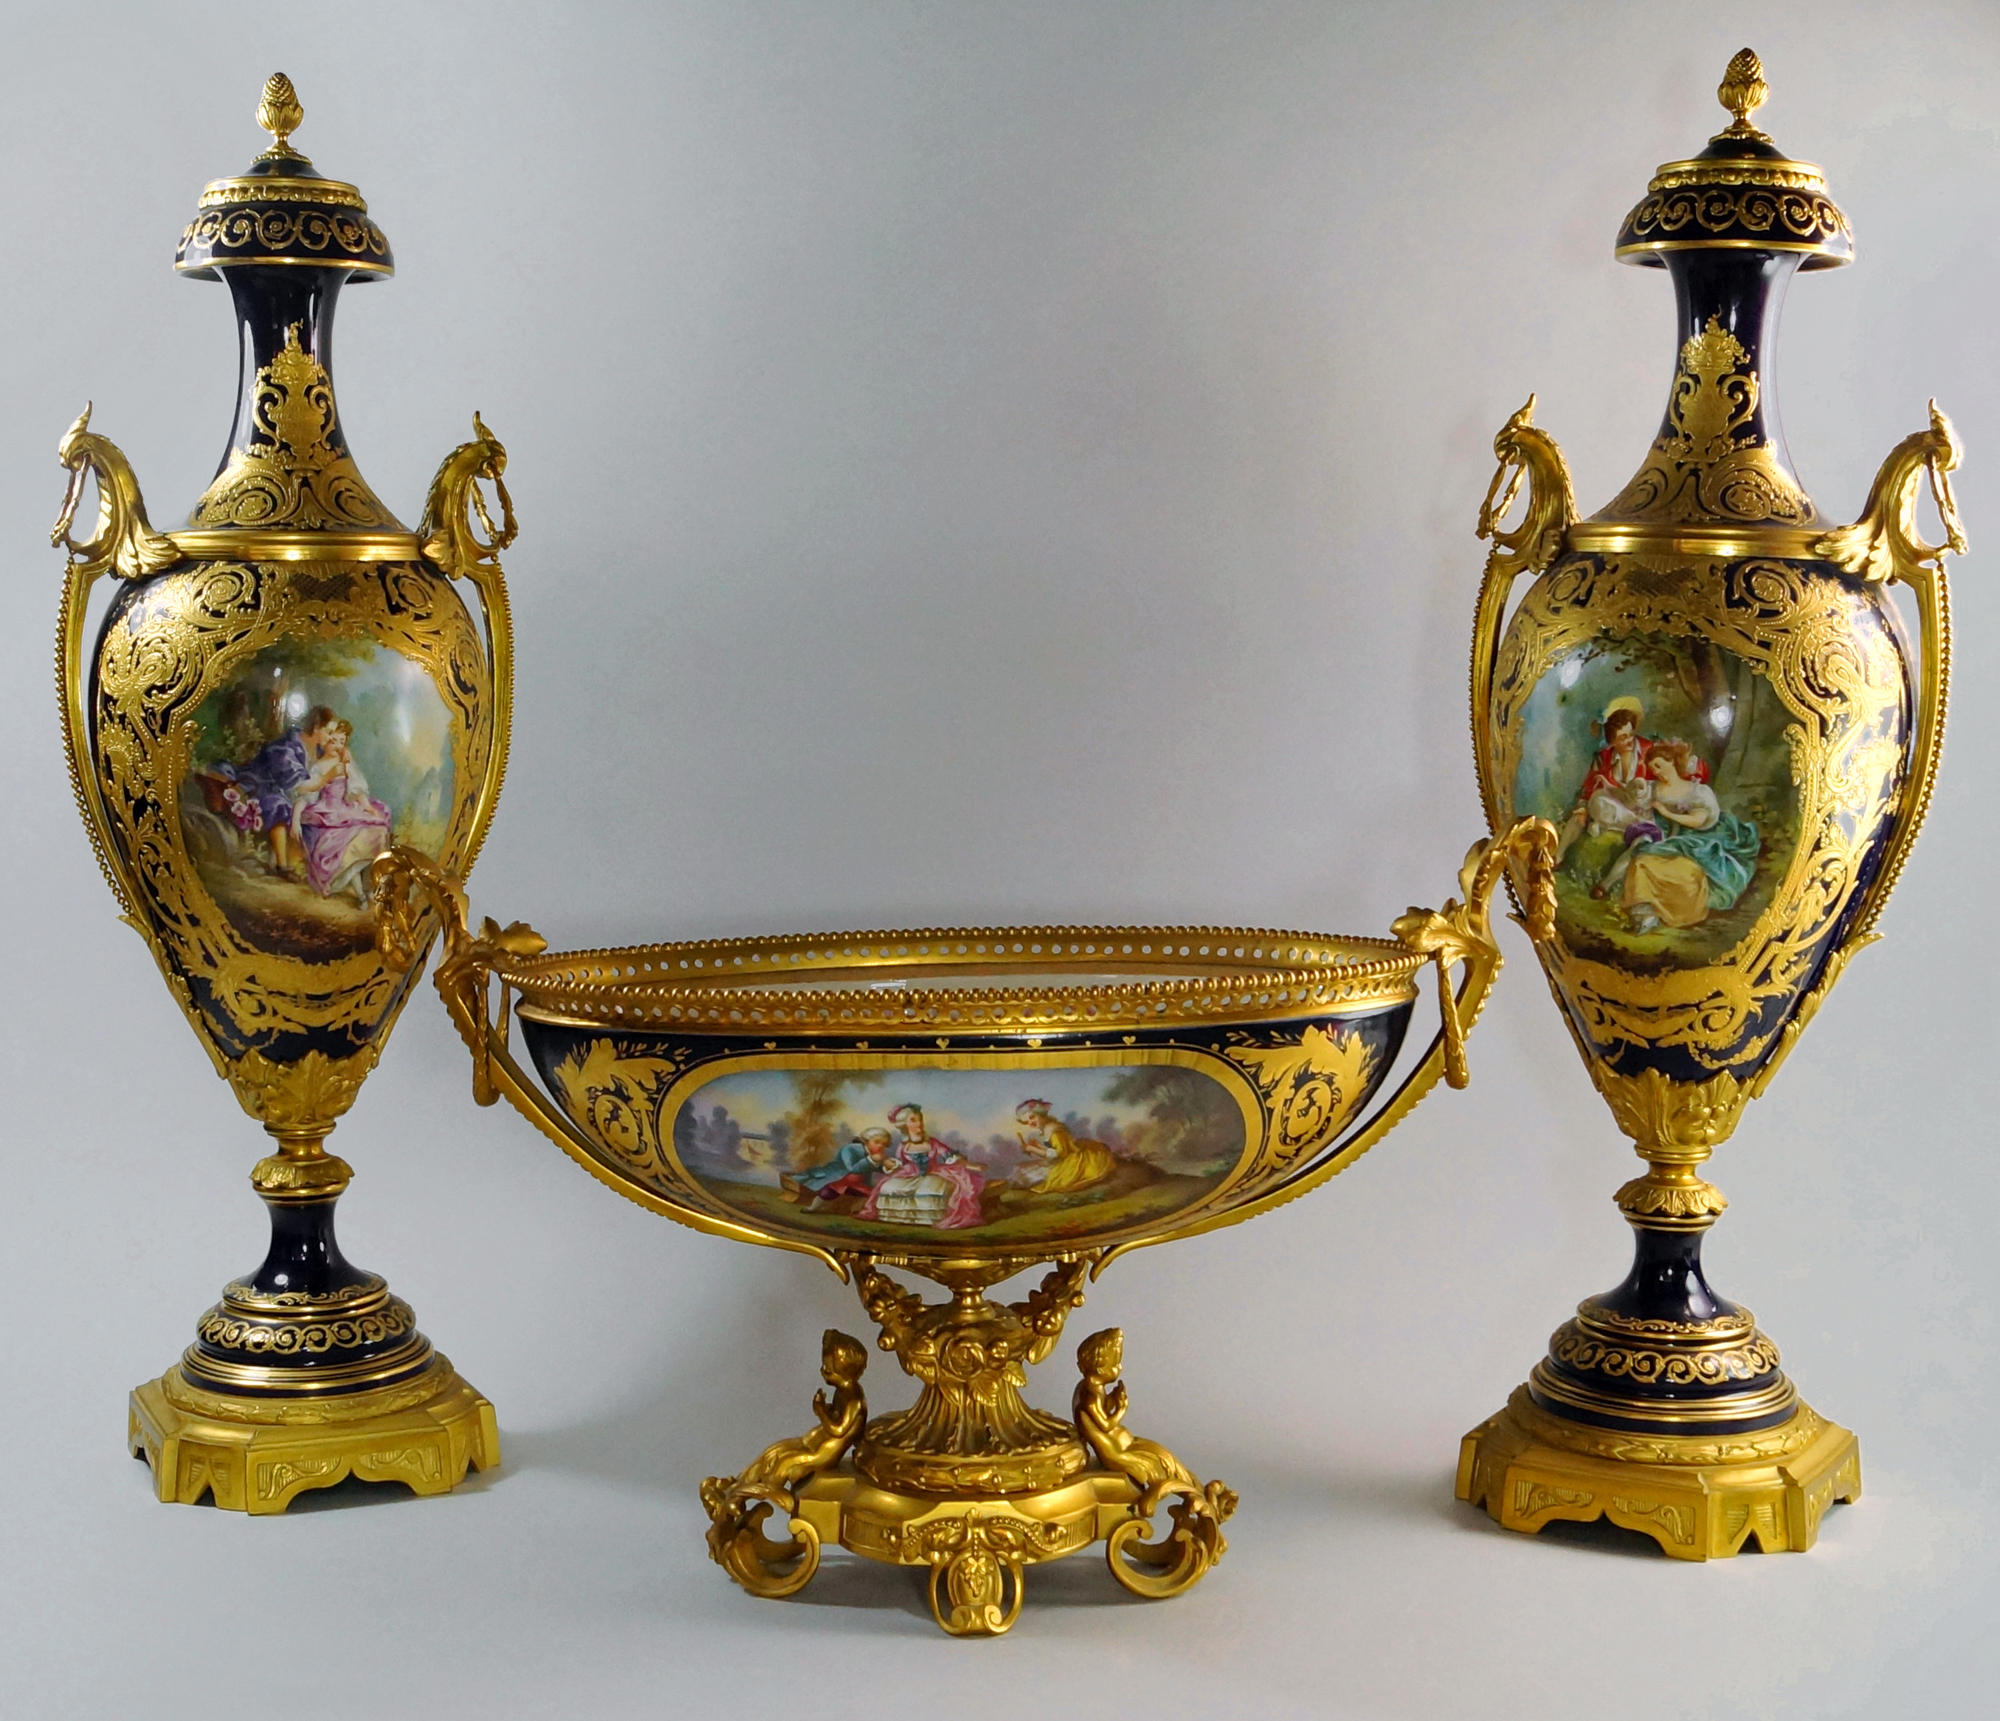 A pair of 19th century Sèvres ormolu mounted porcelain vases with matching oval comport sold for £8,856. Roseberys image